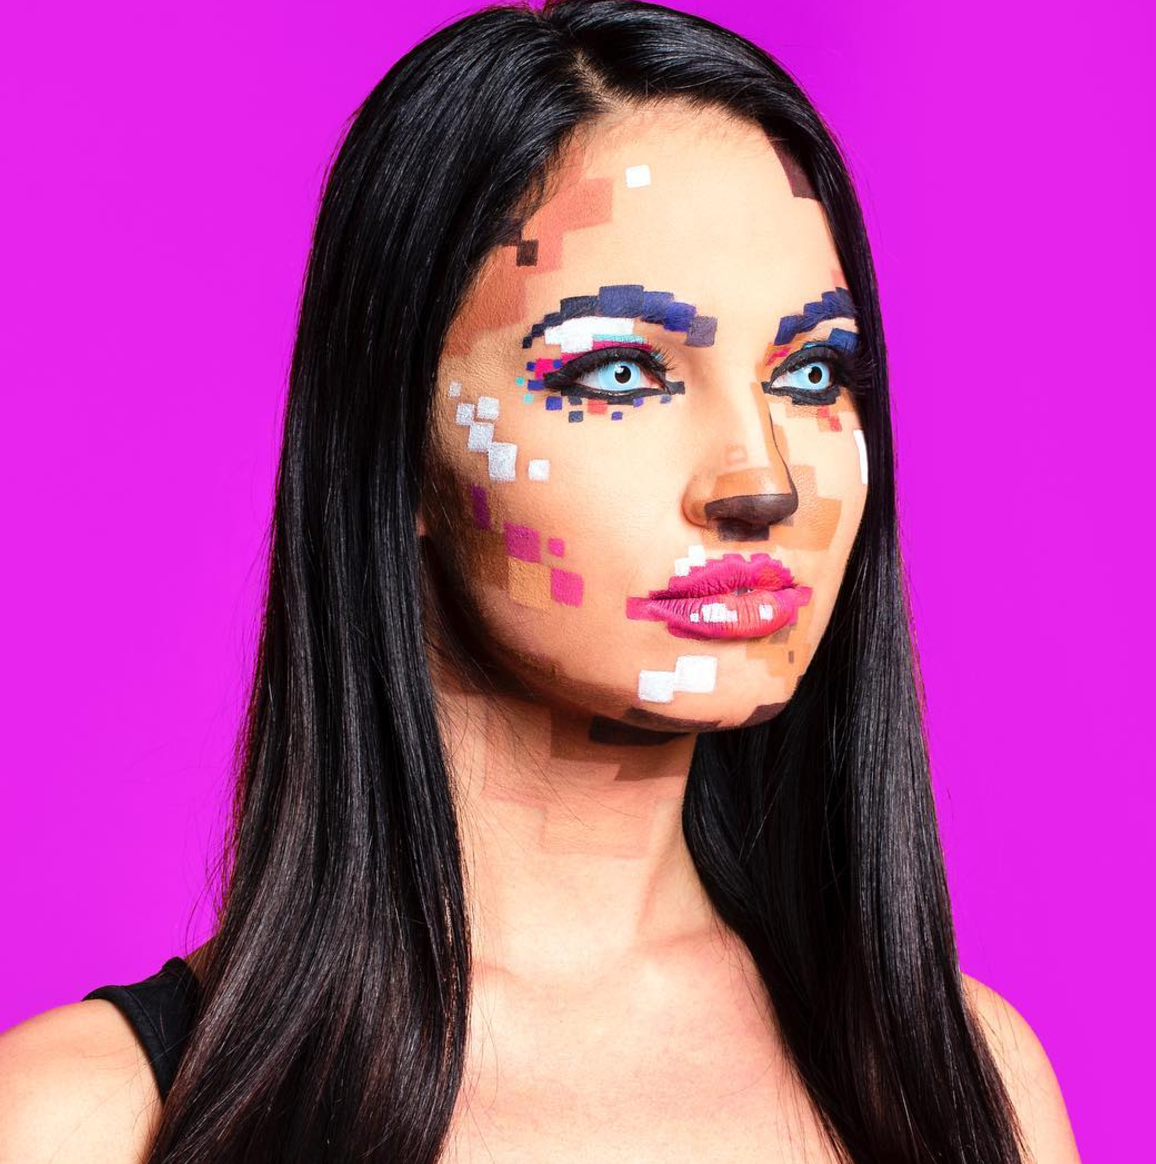 Pixel Makeup Might Be The Perfect Low Key Halloween Costume